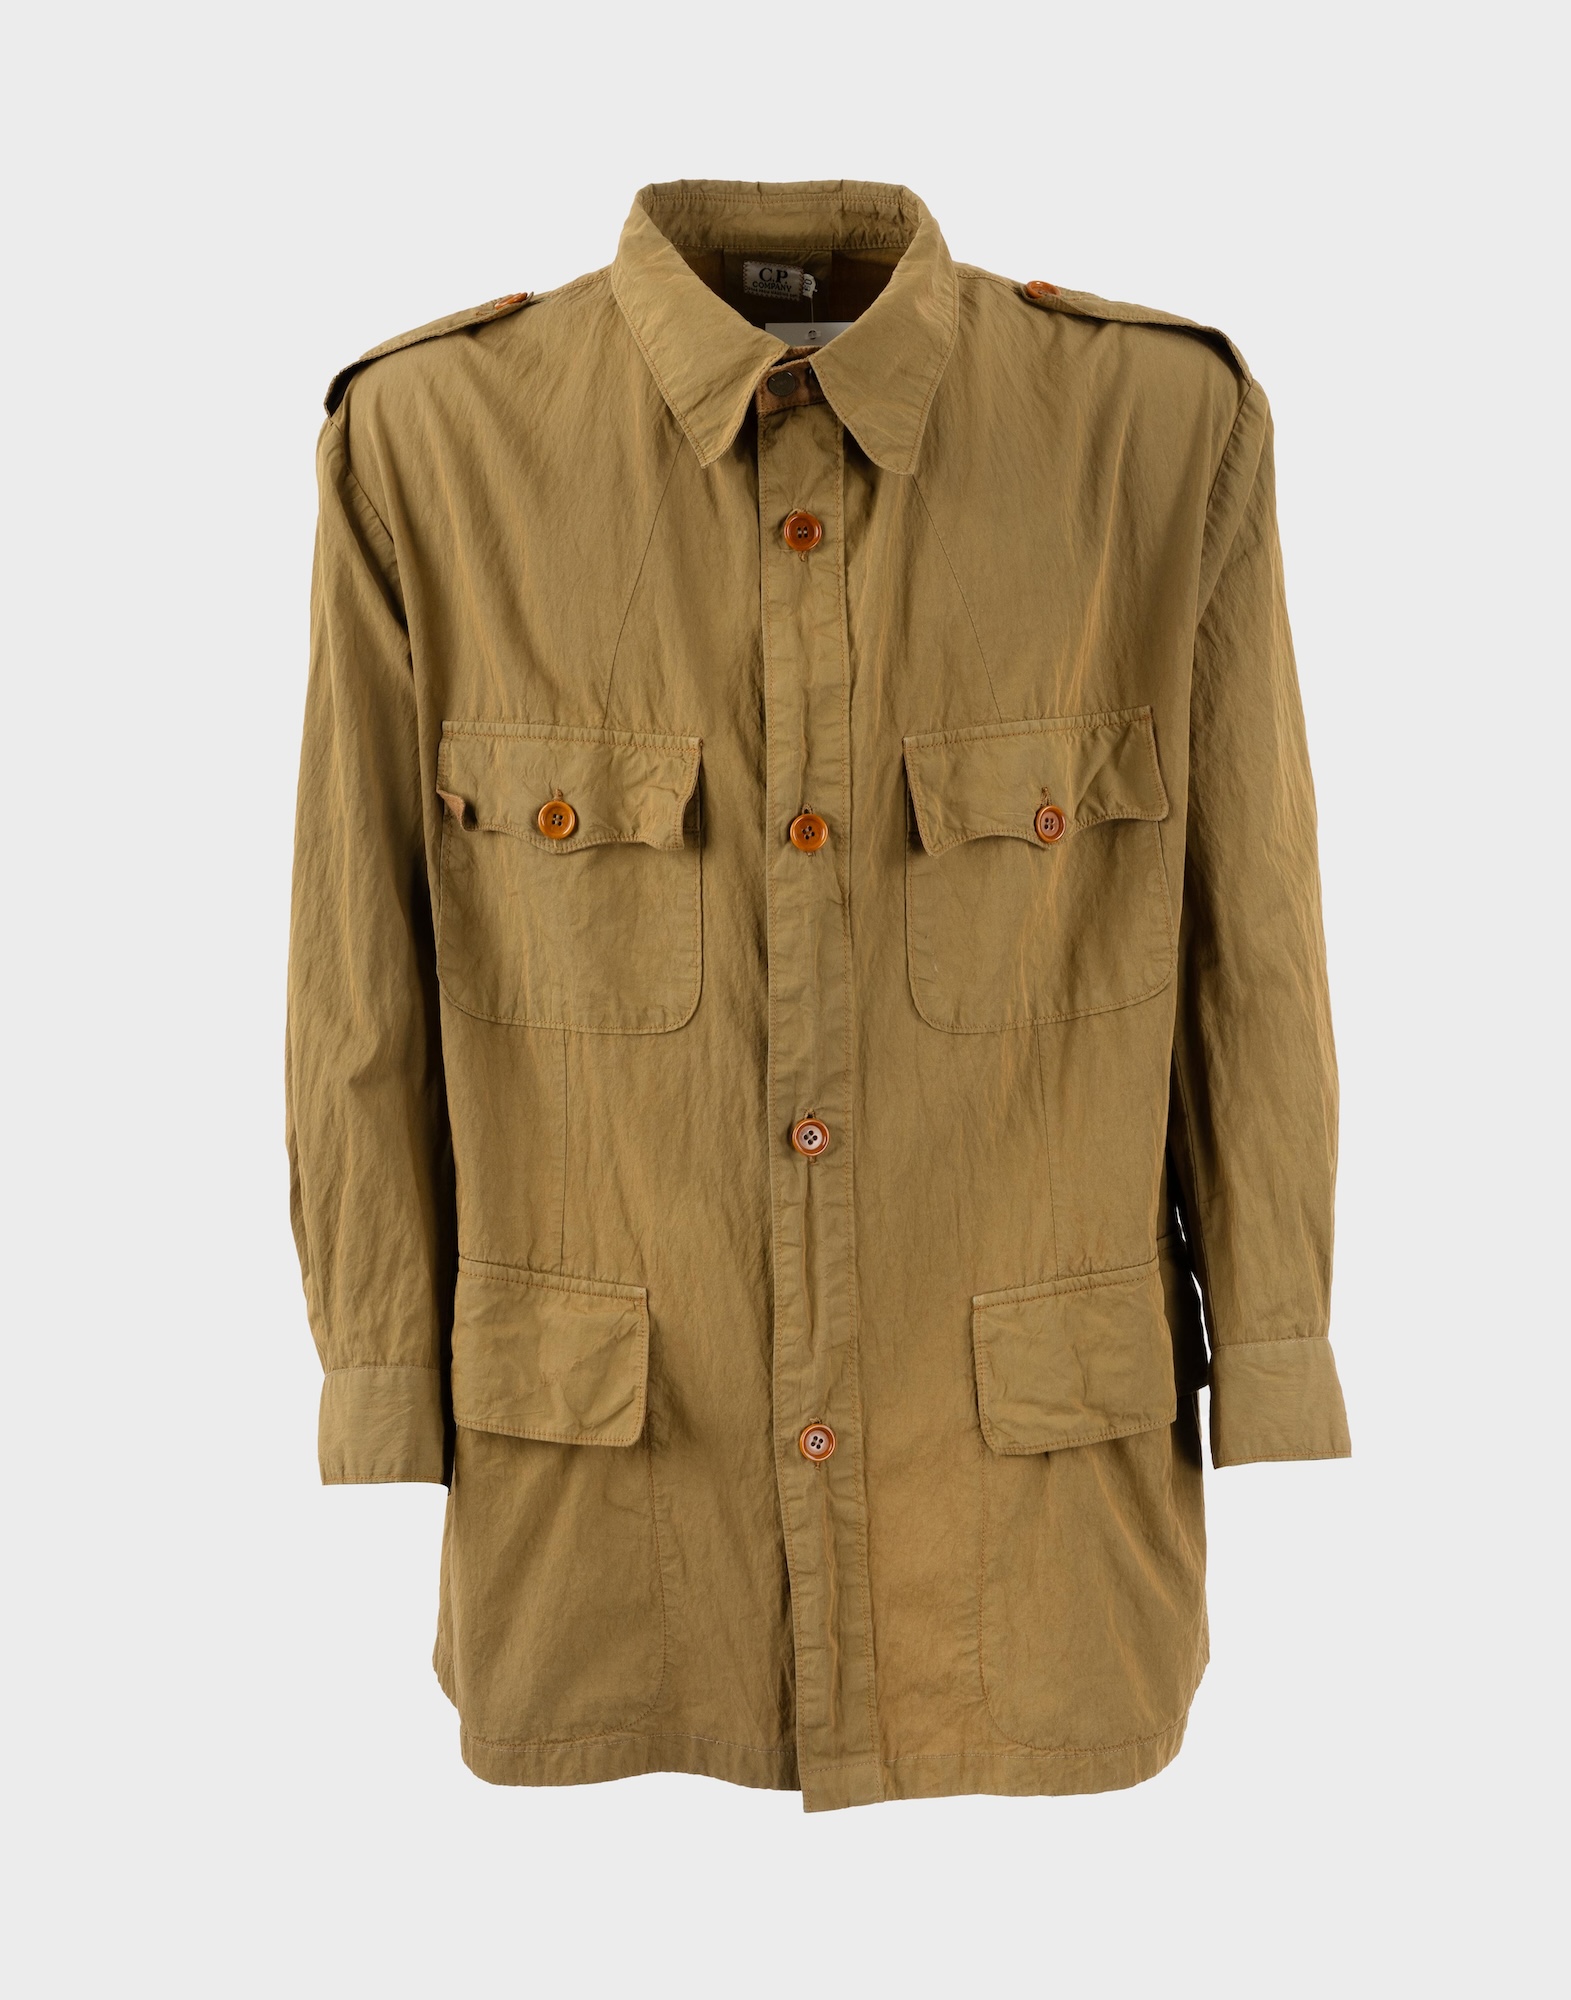 Beige safari jacket by C.P. Company with long sleeves, front fastening with brown buttons, four pockets on the front.